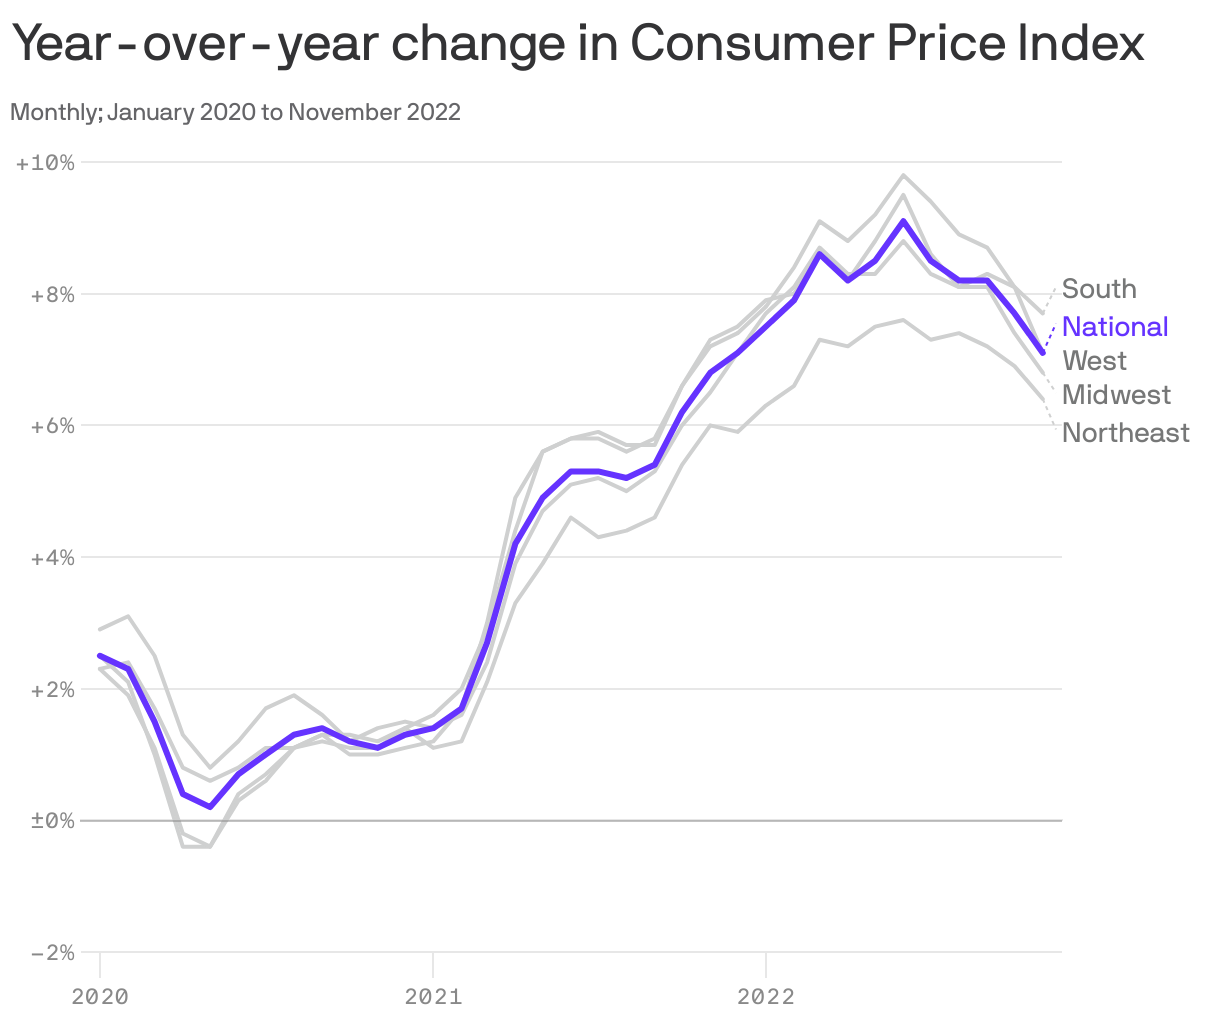 Year-over-year change in Consumer Price Index